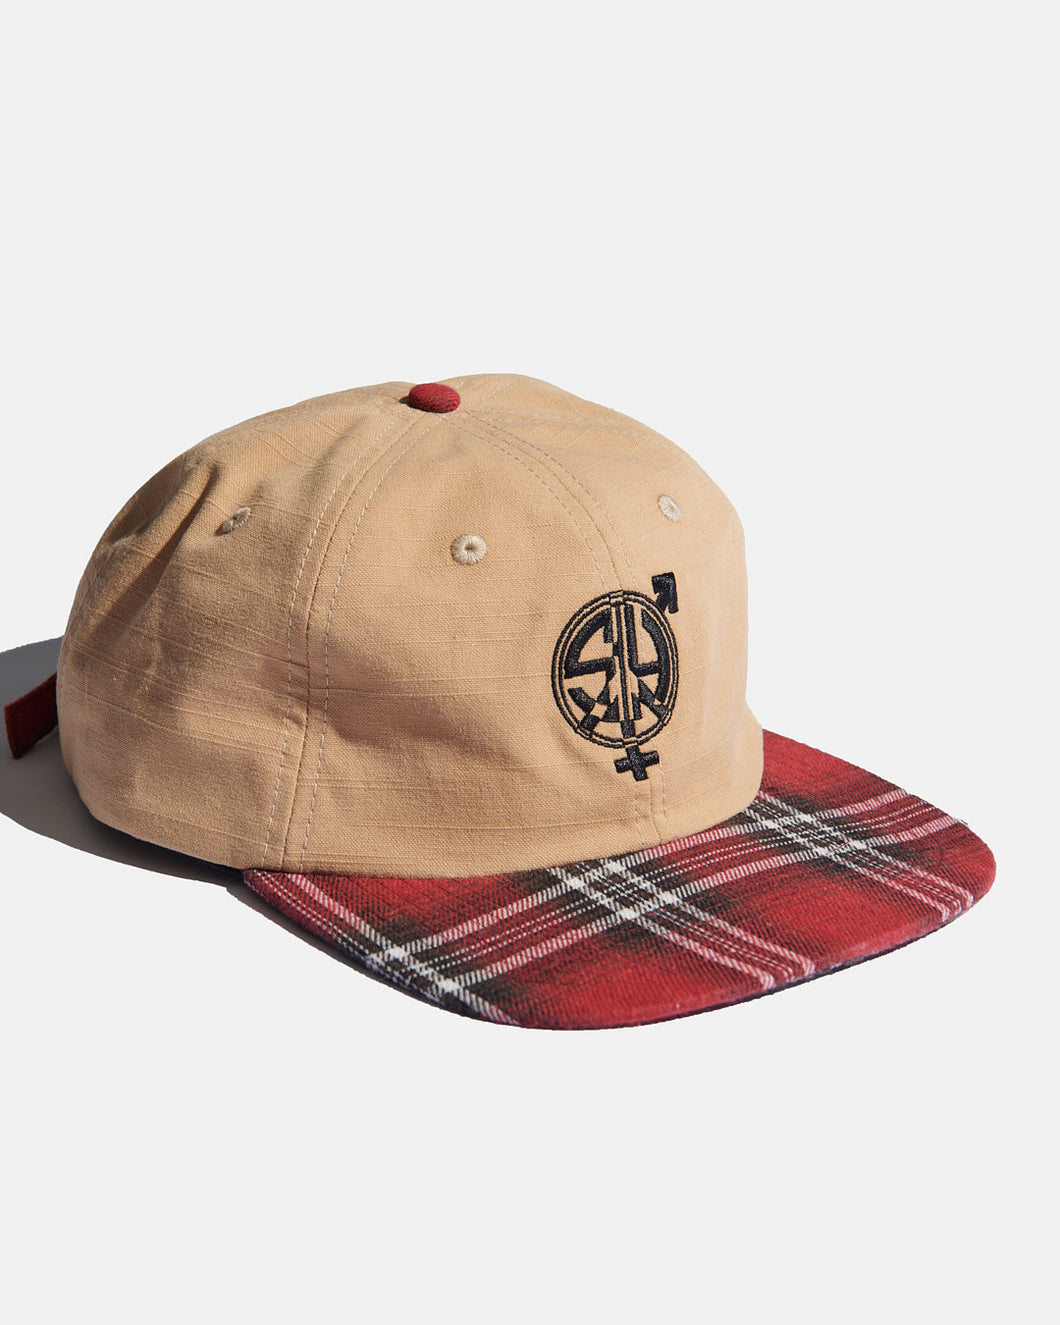 Flannel Brimmed Hat